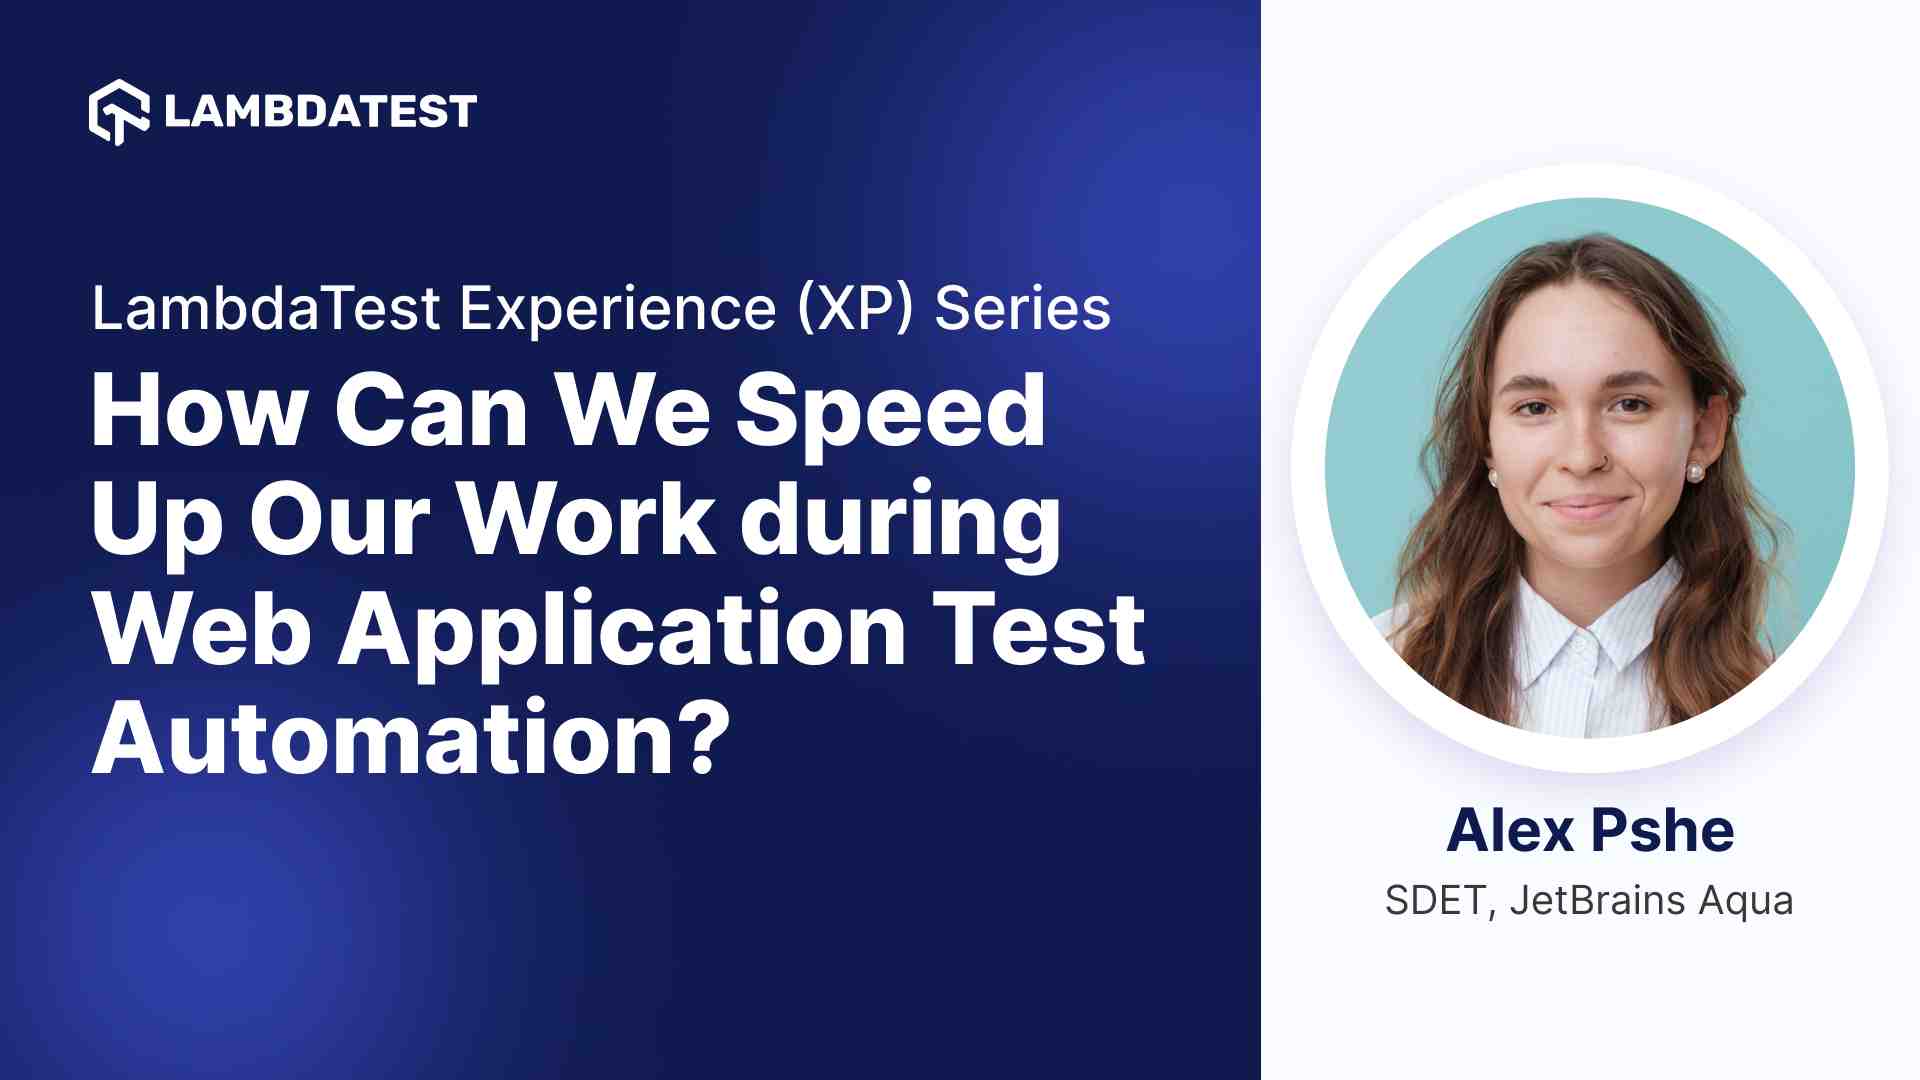 How Can We Speed Up Our Work during Web Application Test Automation?